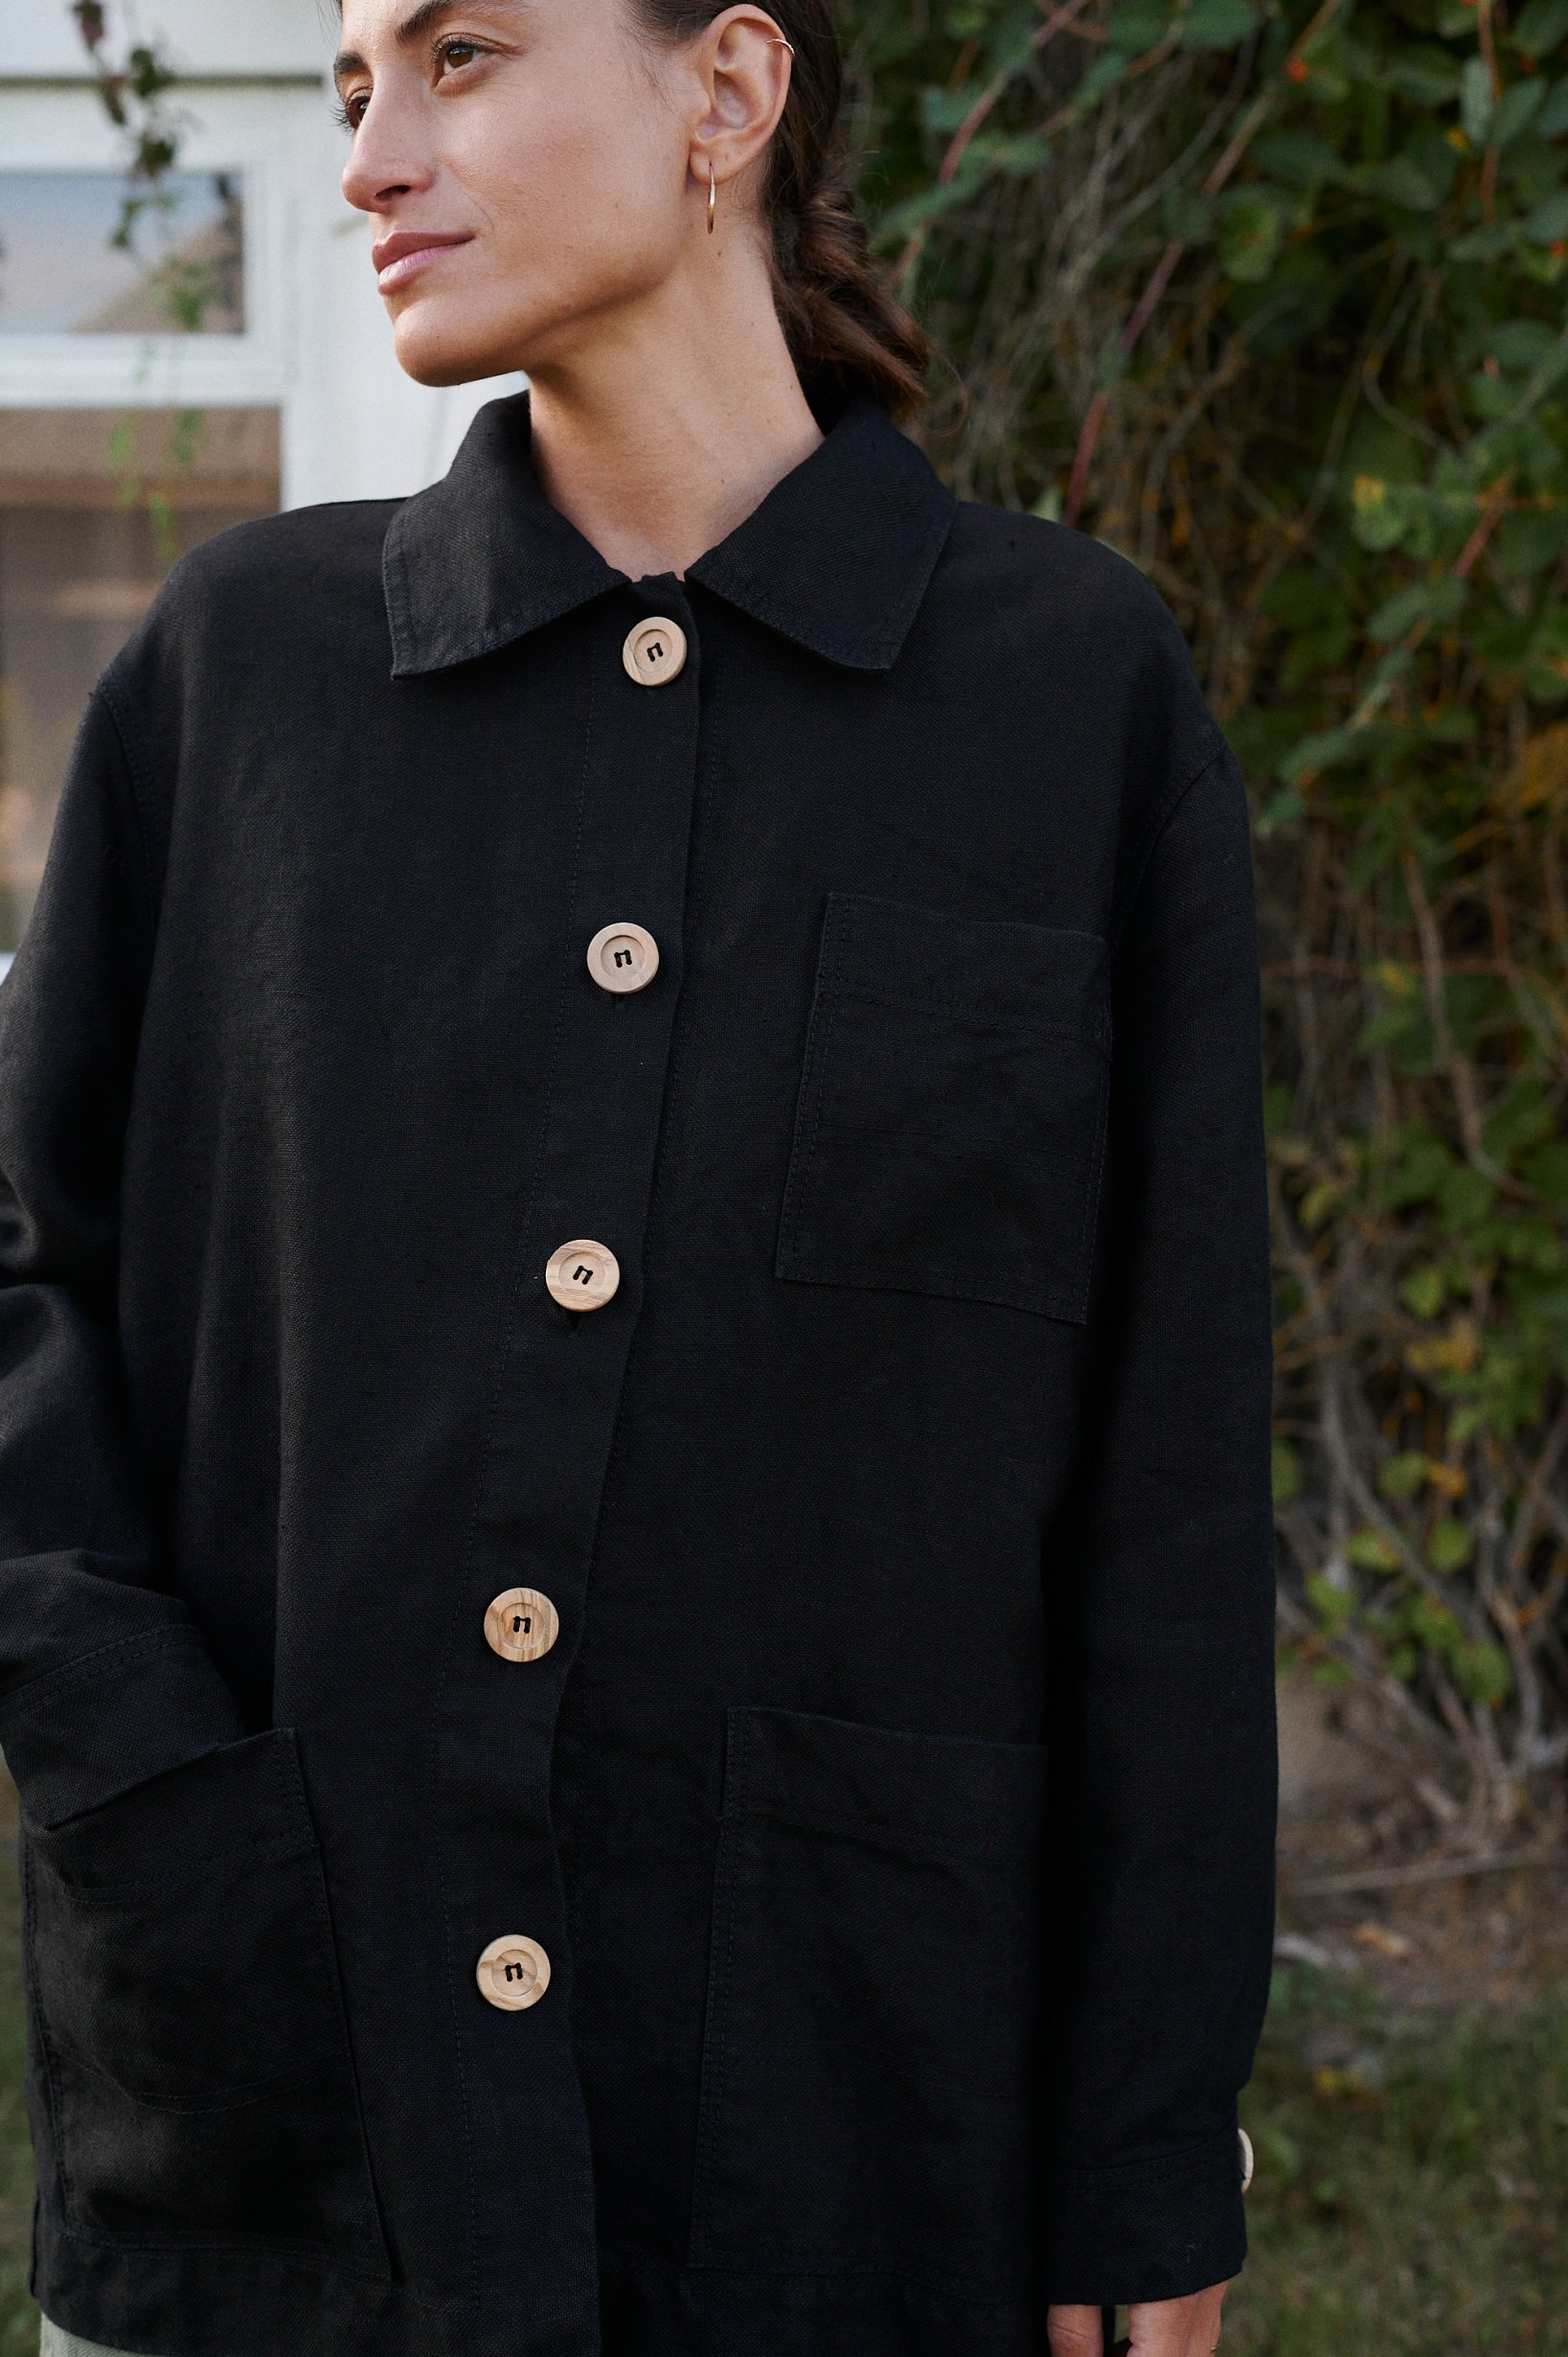 Front details of a linen utility jacket with three patch pockets and wooden buttons